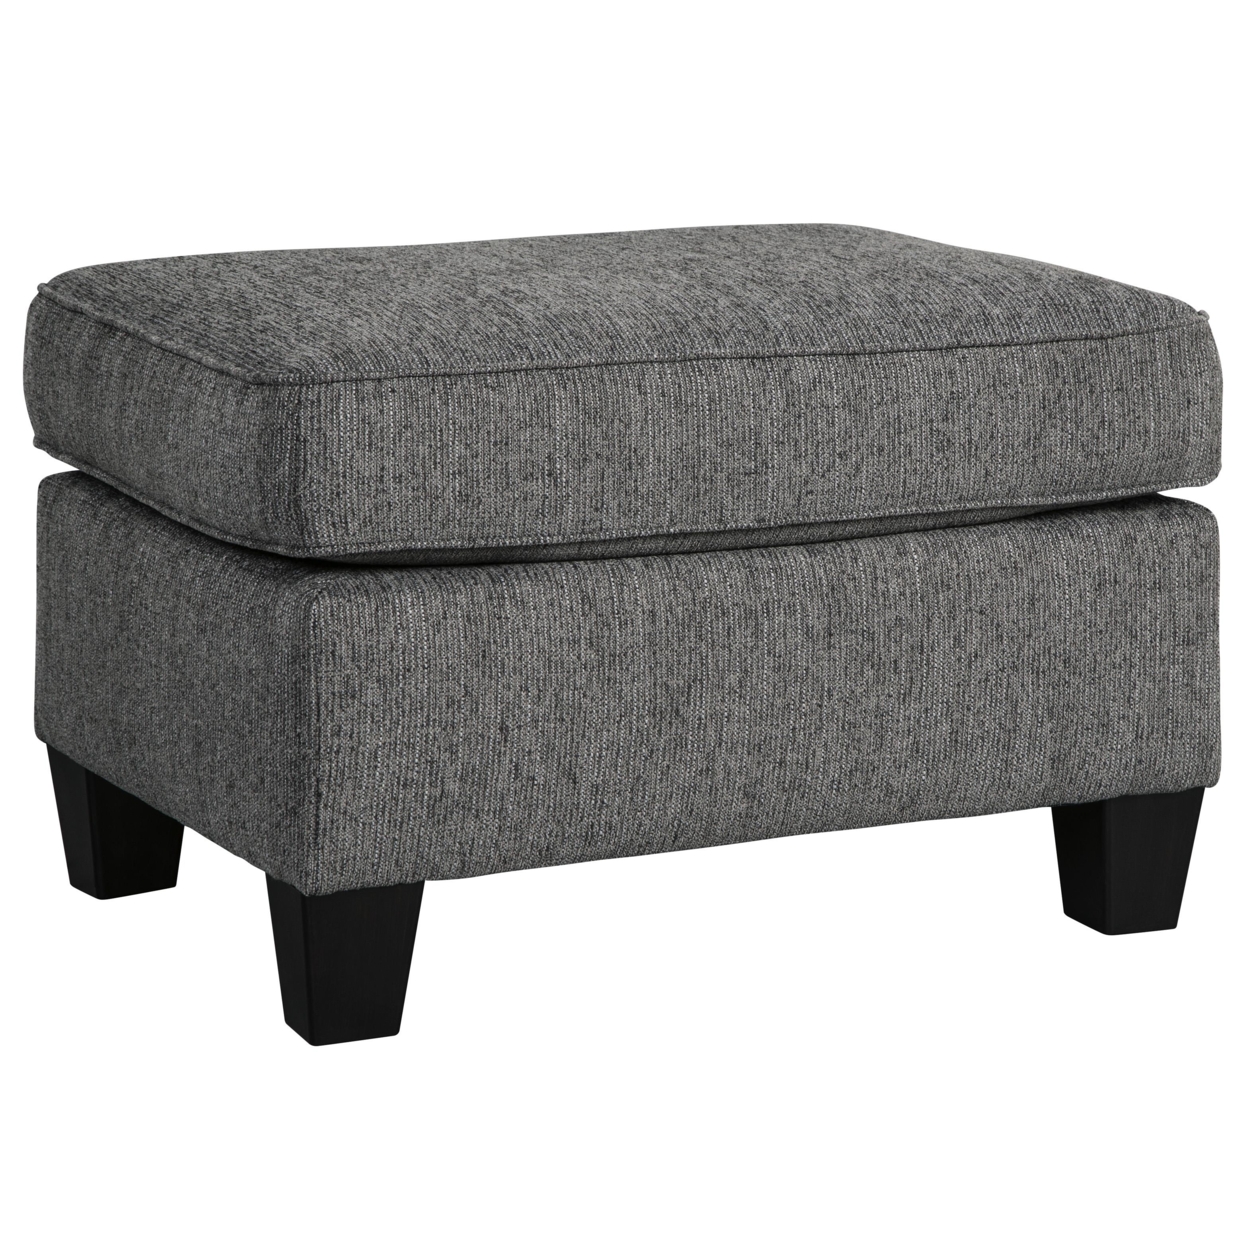 Square Wooden Ottoman With Textured Upholstery And Tapered Legs, Gray- Saltoro Sherpi